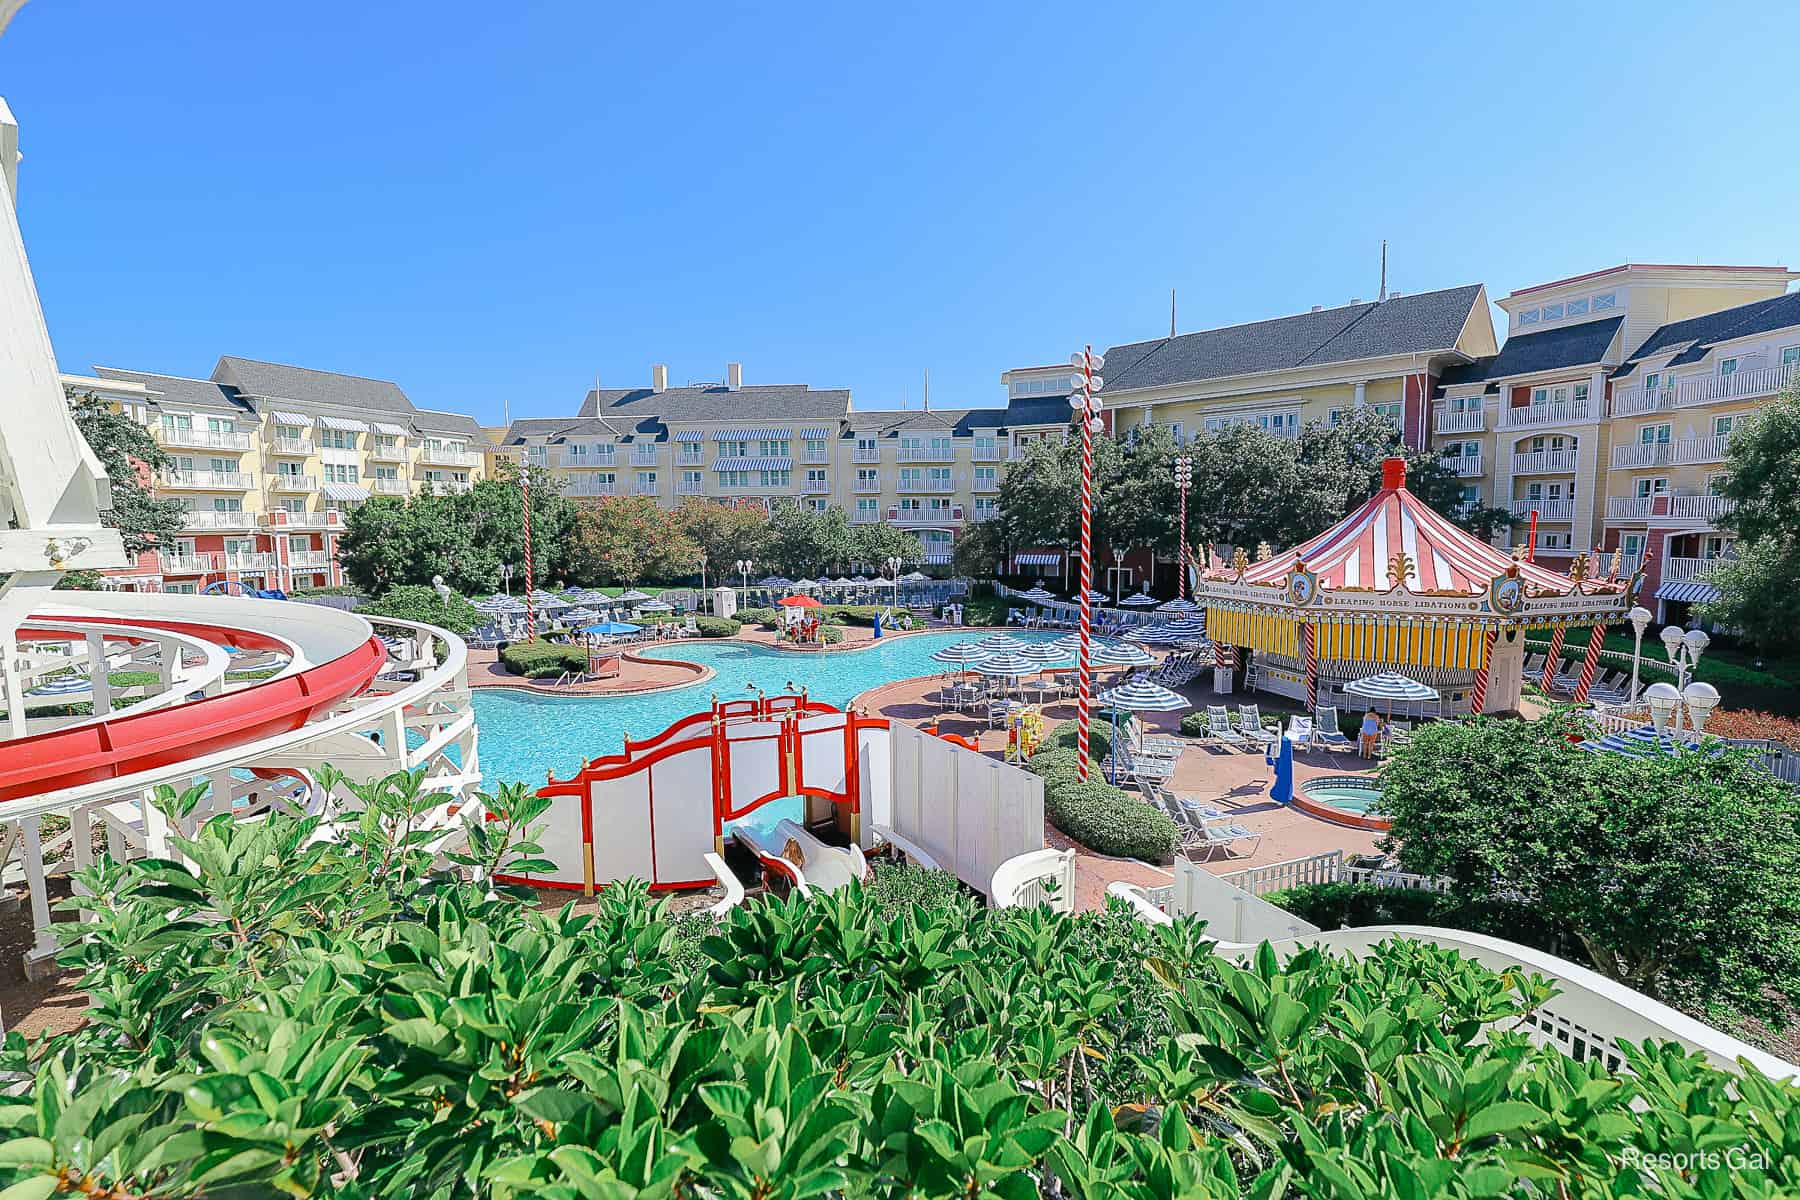 an overview of the feature pool area at Disney's Boardwalk 